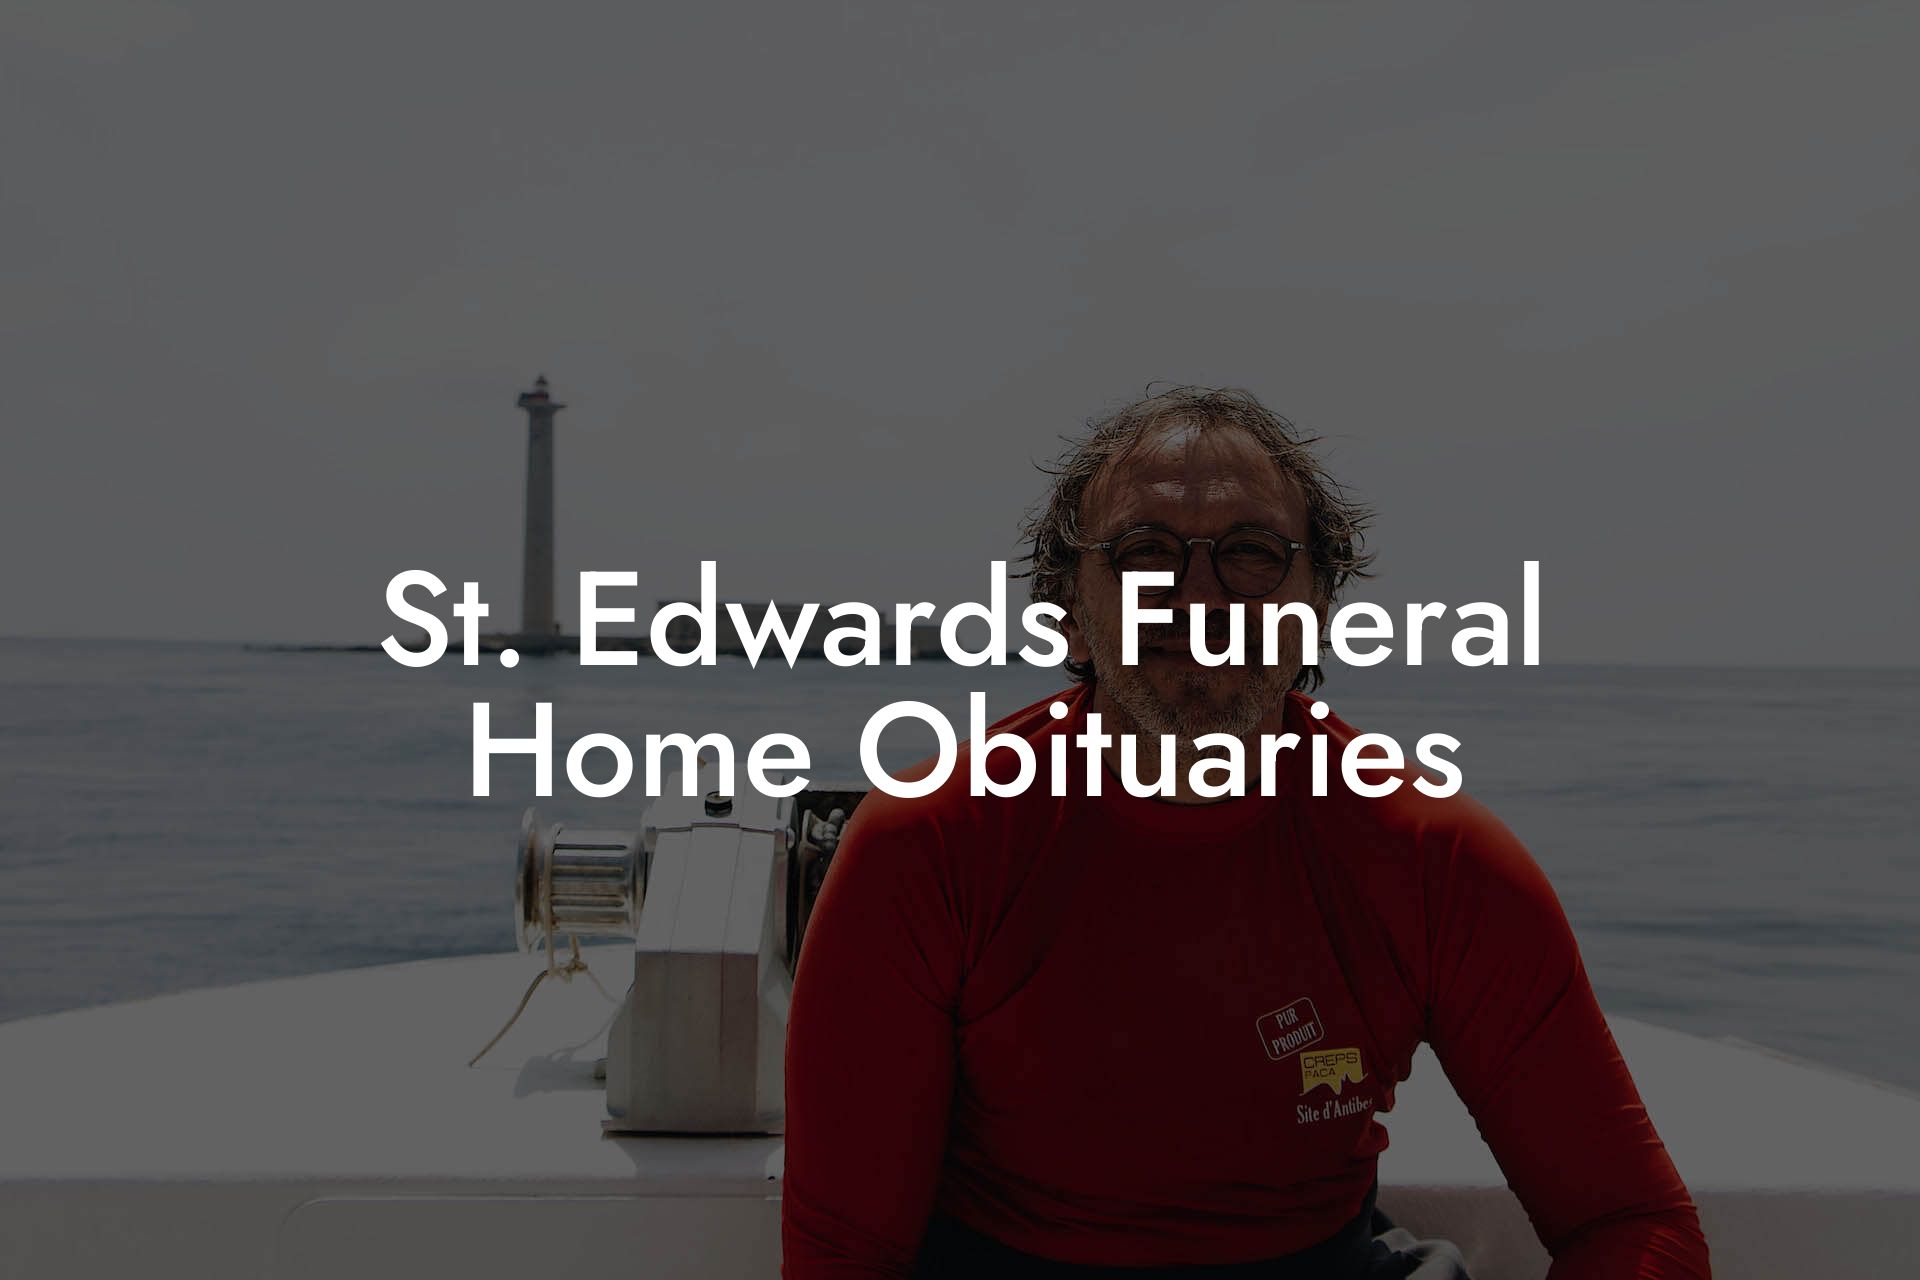 St. Edwards Funeral Home Obituaries